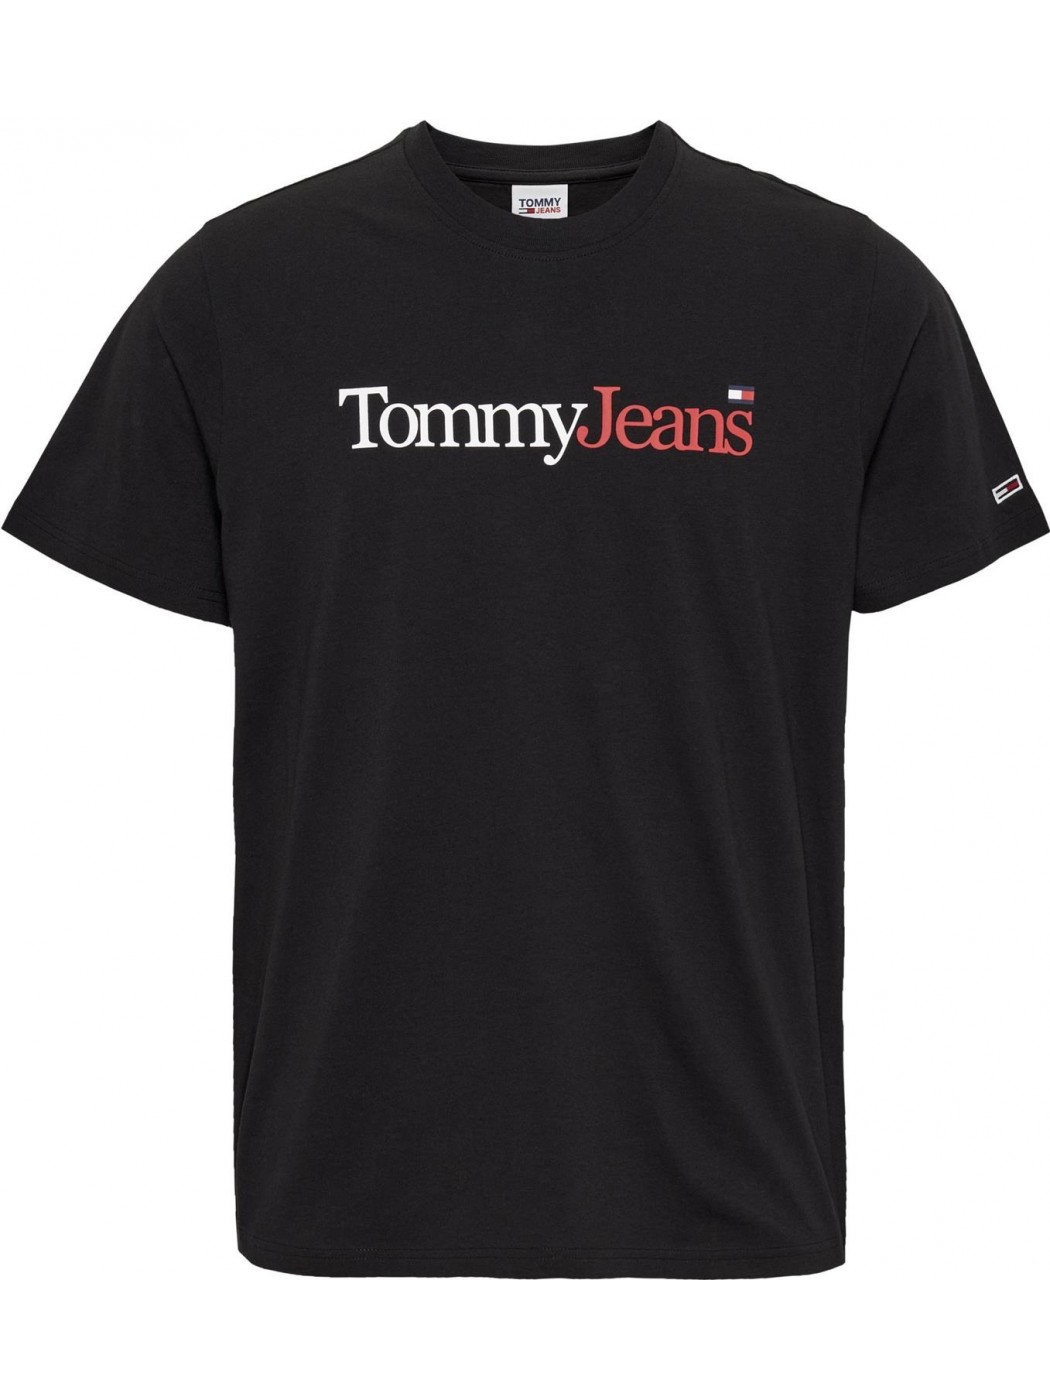 CAMISETA TOMMY JEANS HOMBRE...